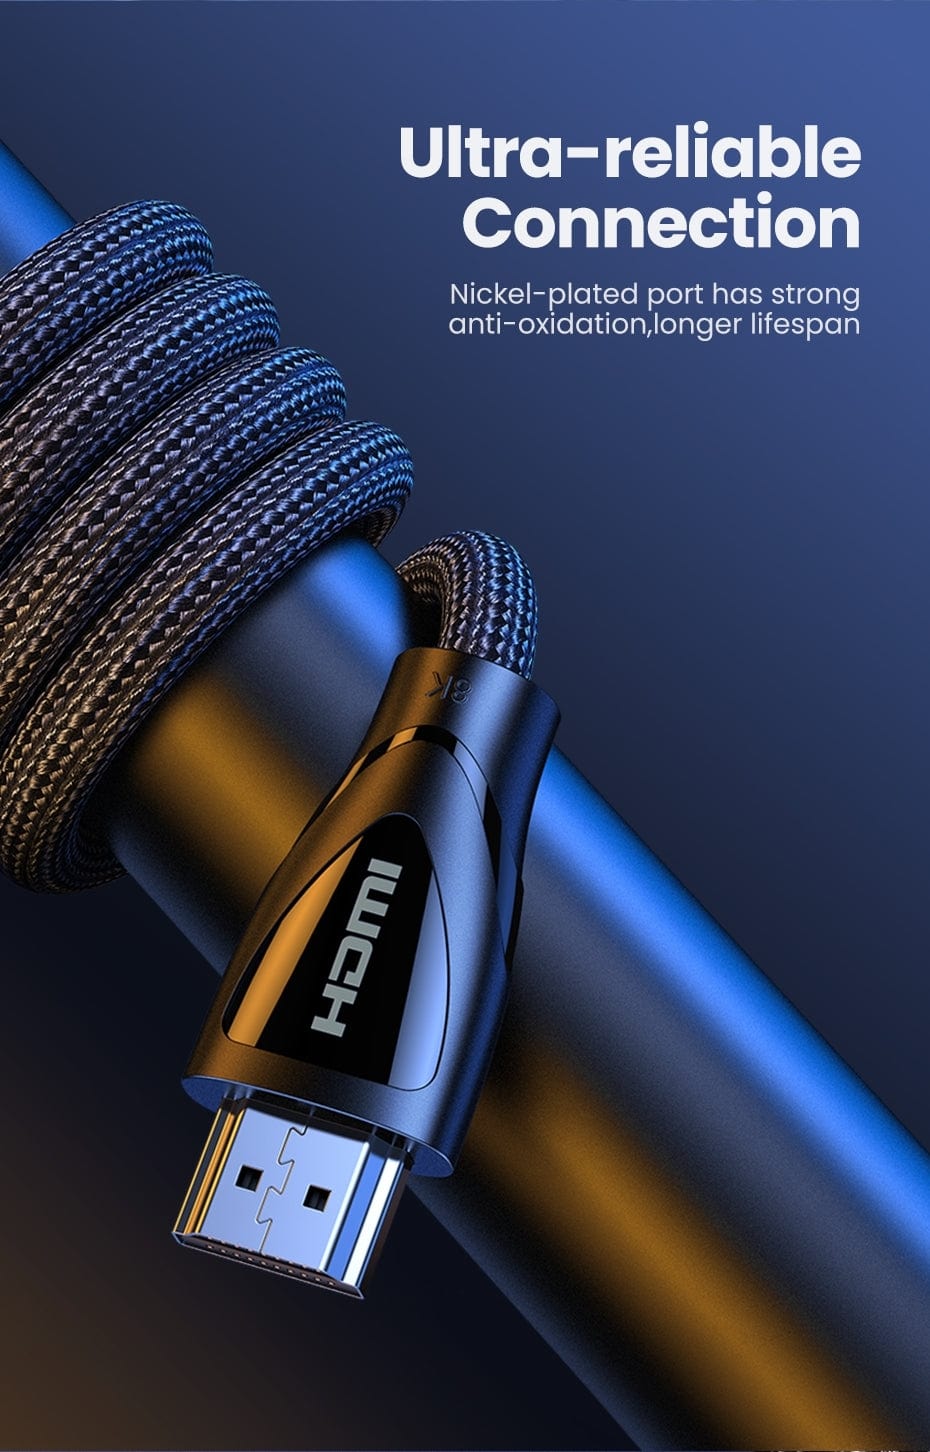 8K 60 HZ HDMI 2.1 A M/M Cable with Braided 10M